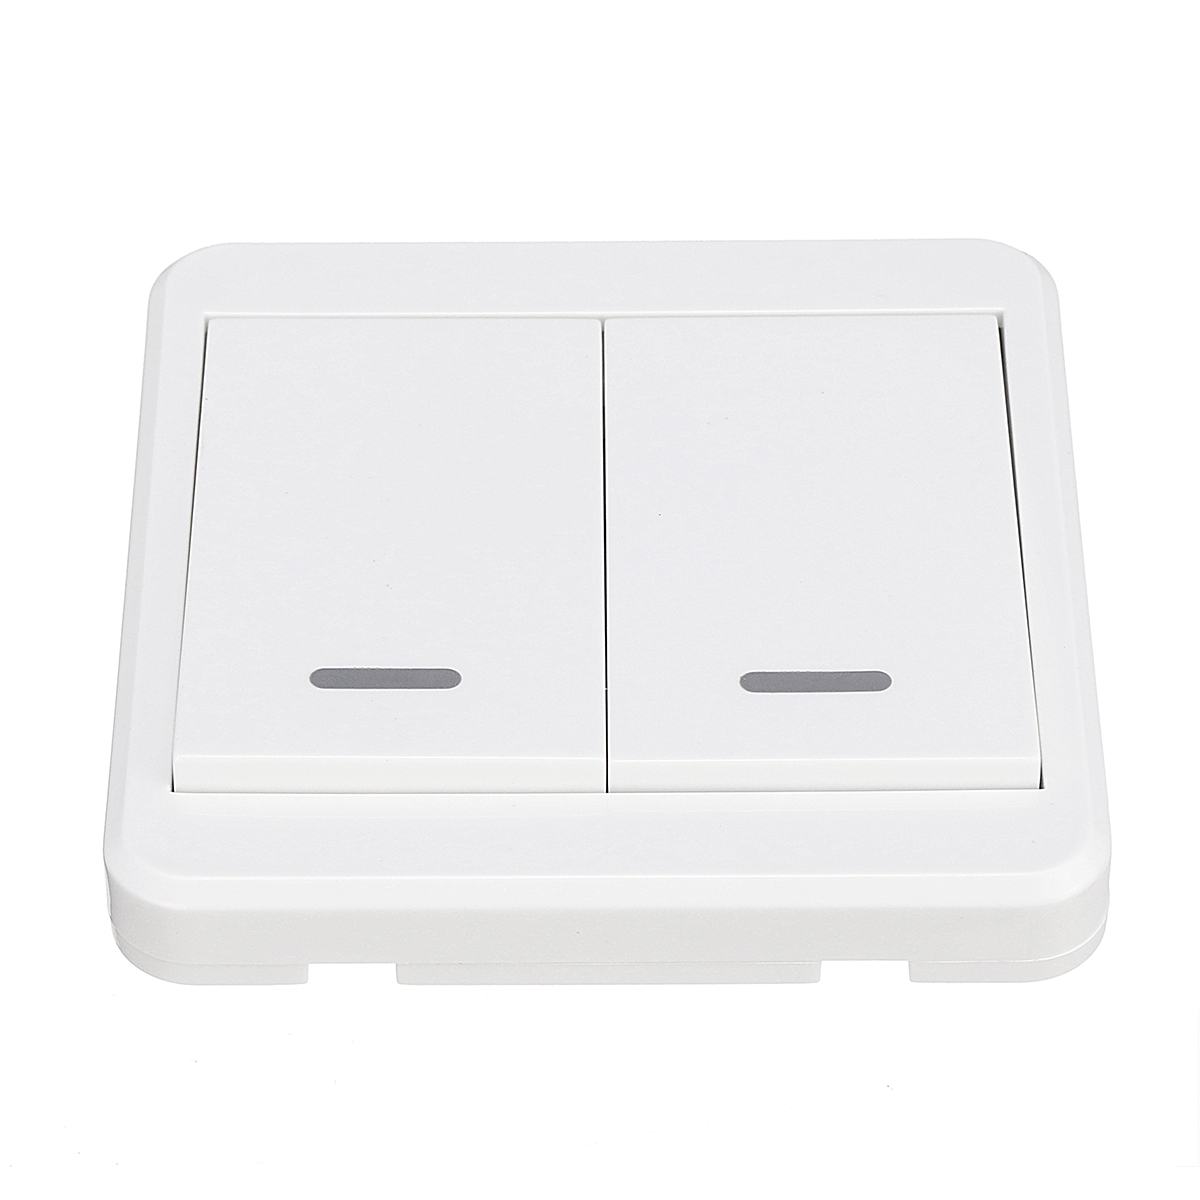 123-Way-Push-Button-Switch-Remote-Control-Switch-86-Wall-Panel-315MHz-Wireless-1334553-5